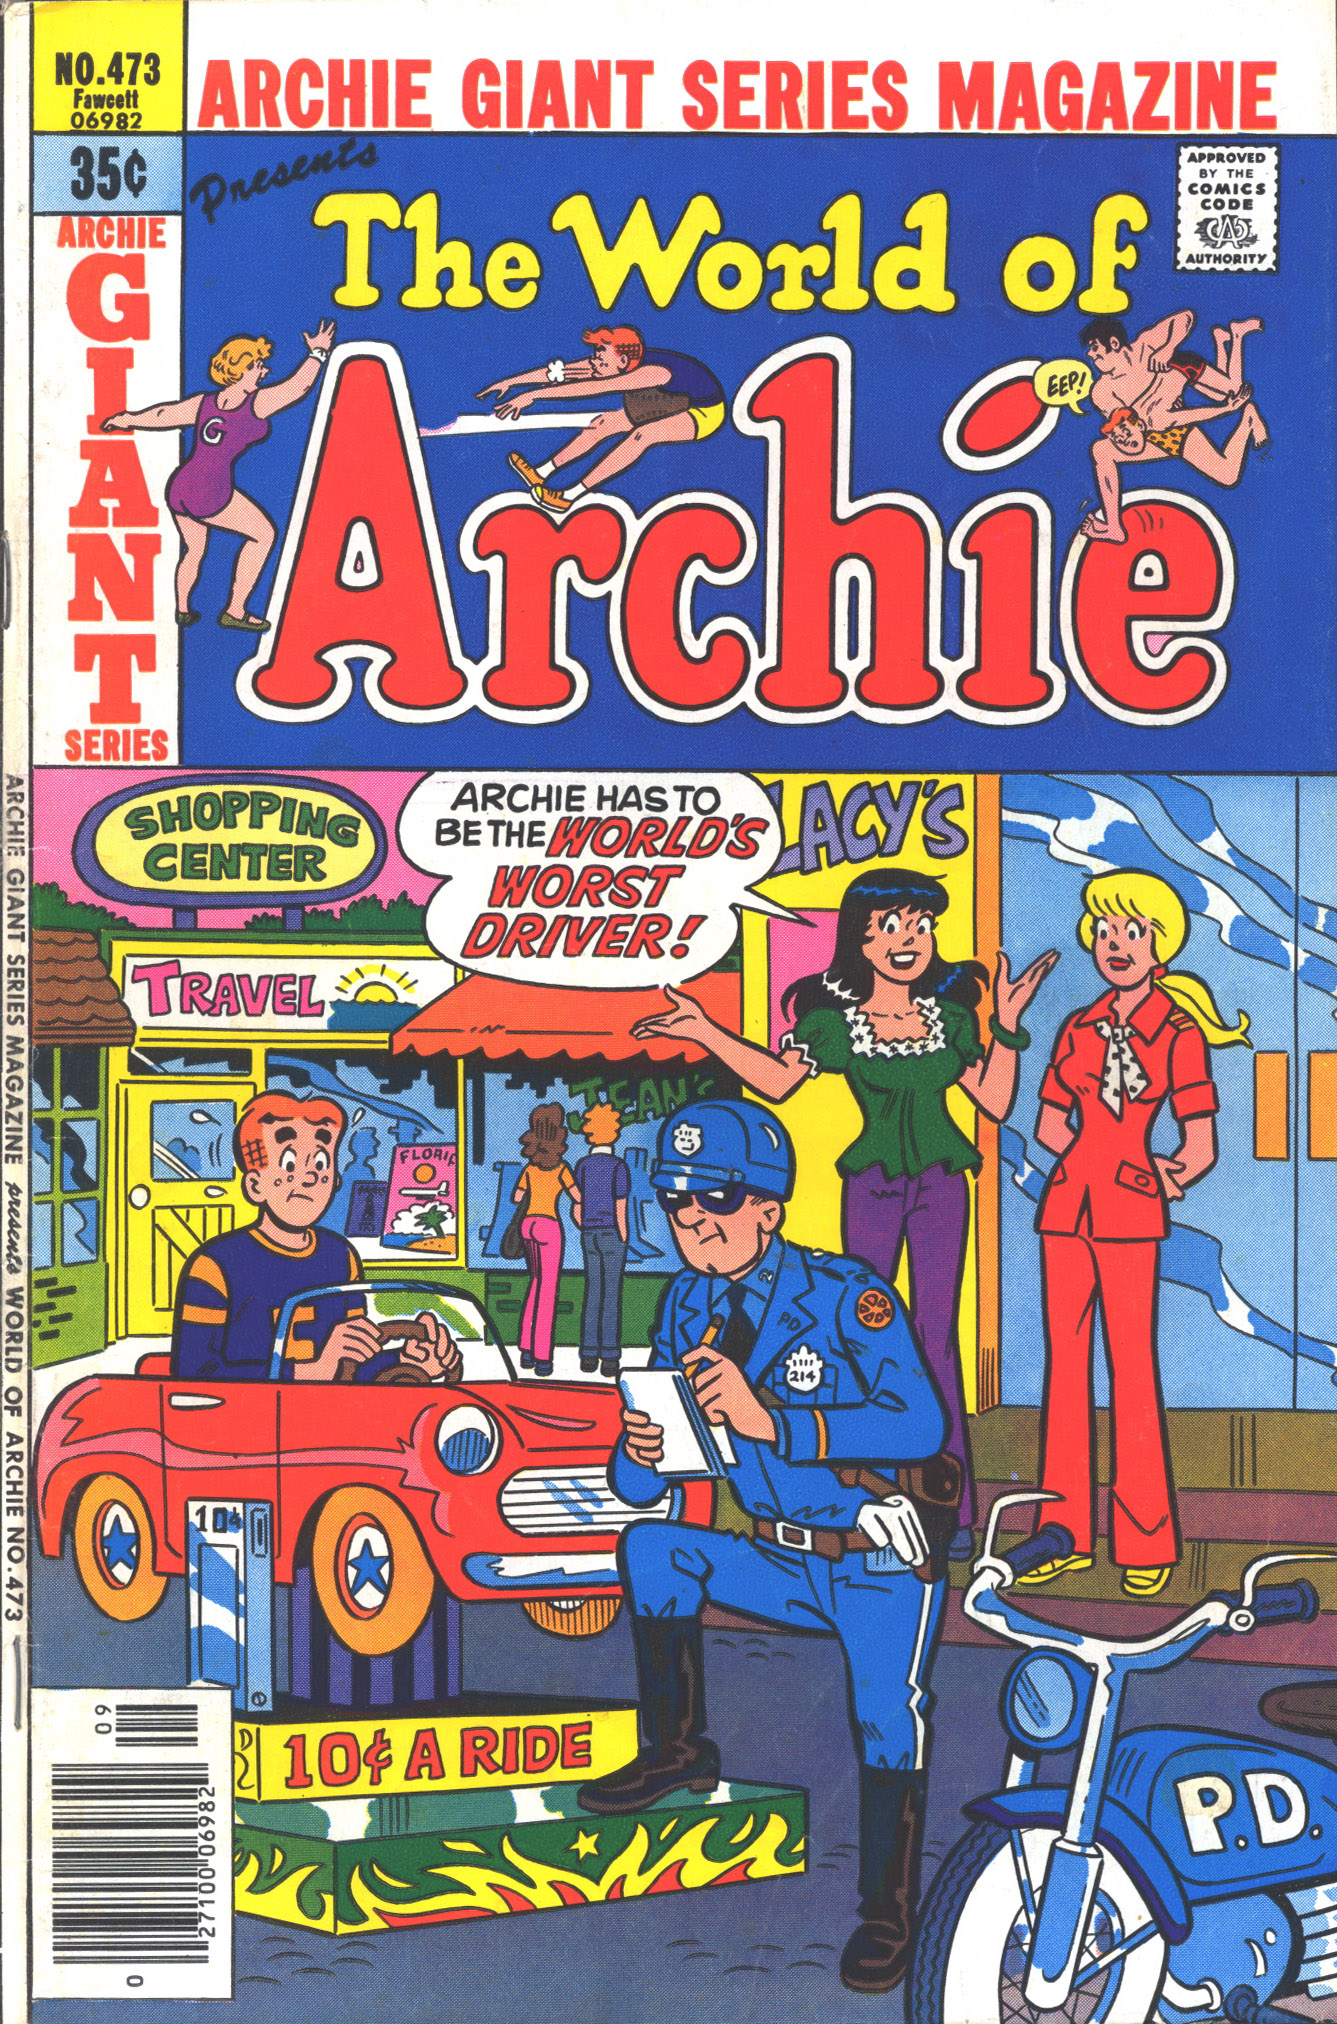 Read online Archie Giant Series Magazine comic -  Issue #473 - 1